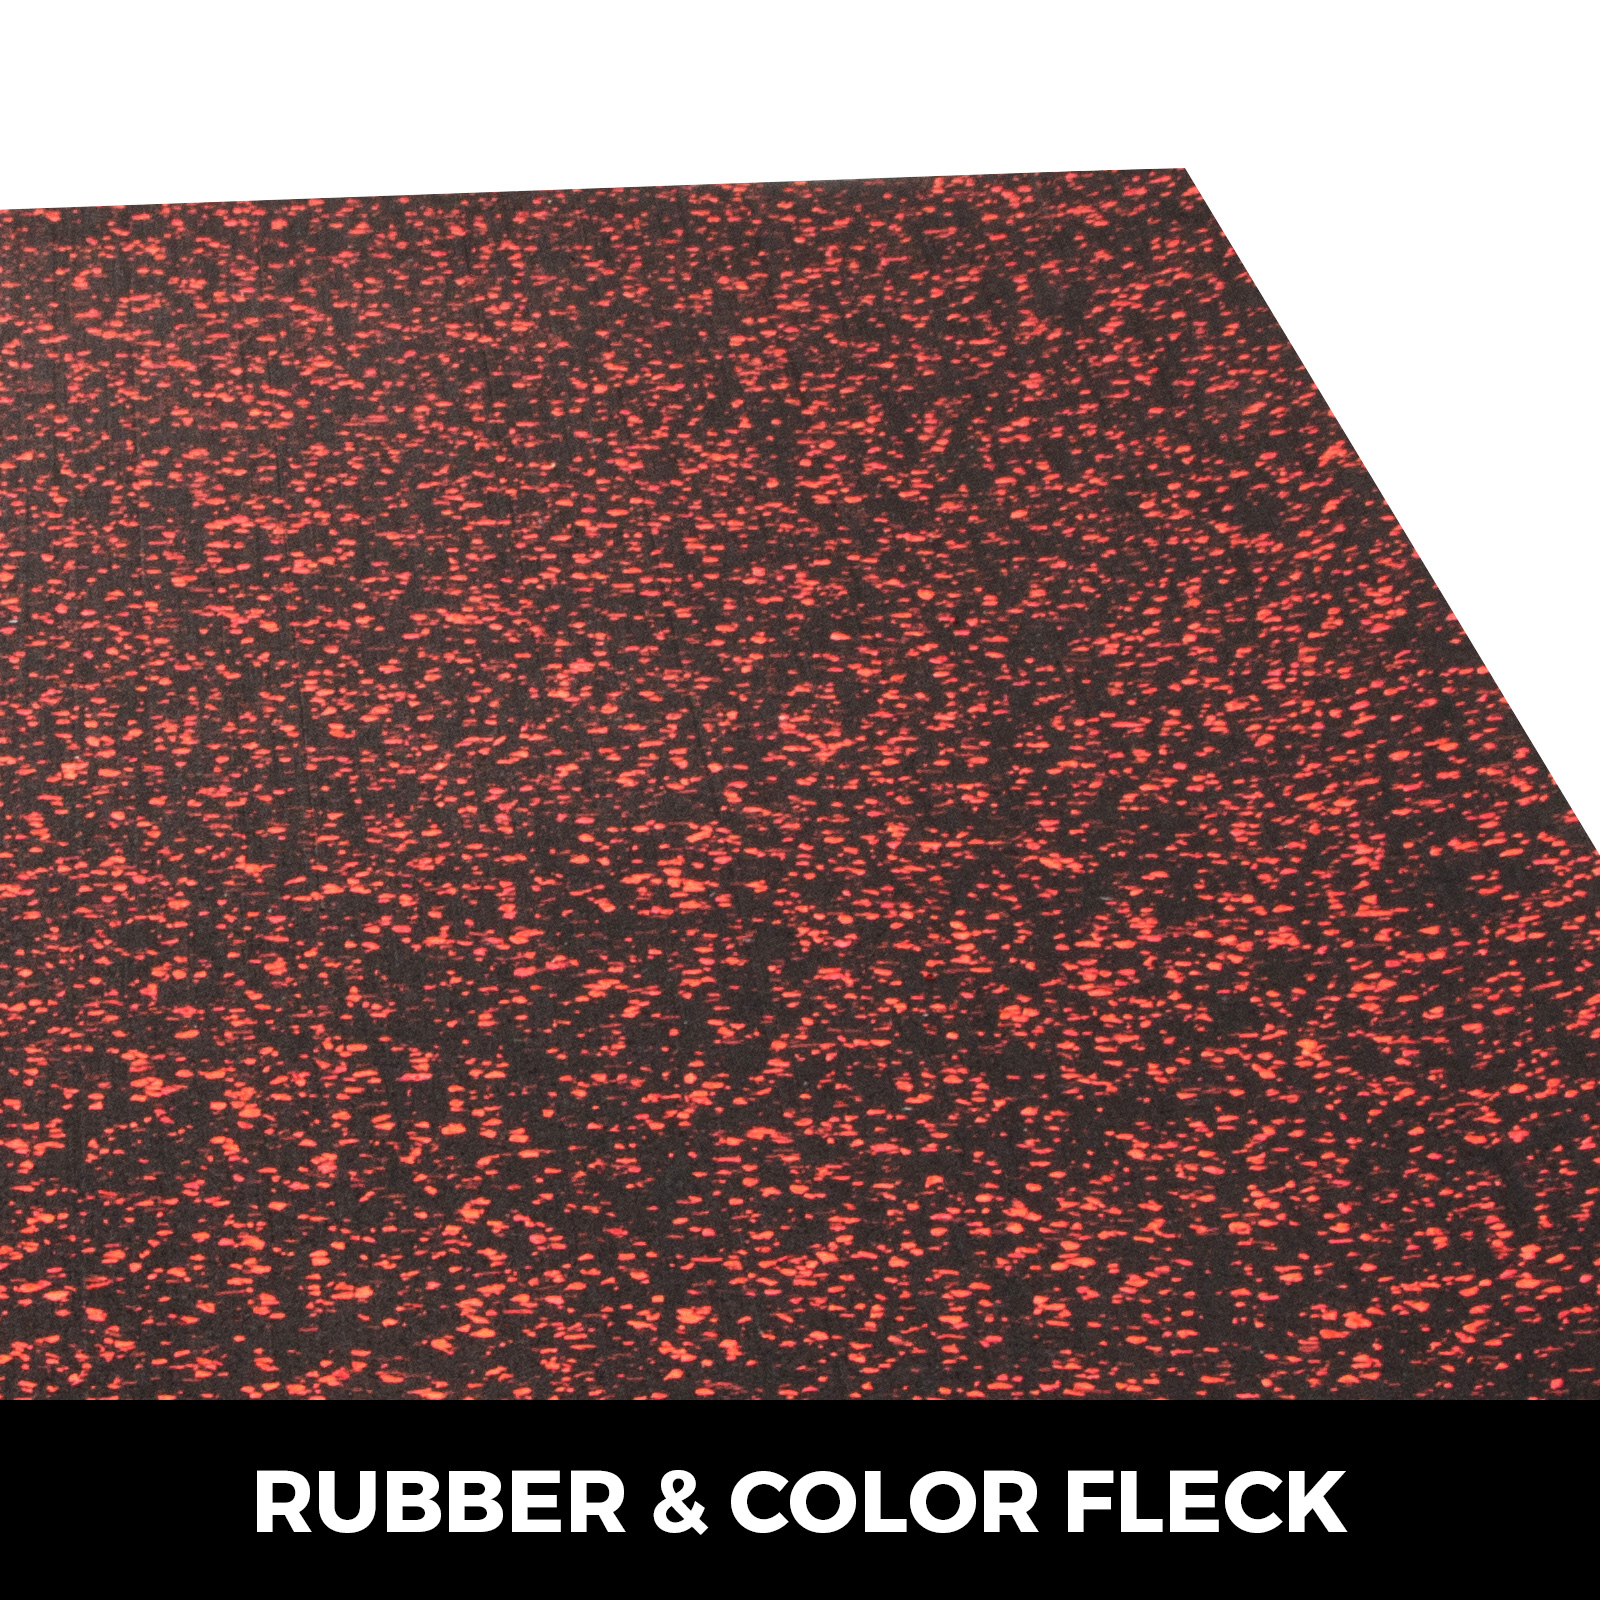 Rubber Flooring Rolls 3.6' x15.3' 8mm Exercise & Gym Exercise Mat Red Speckle 